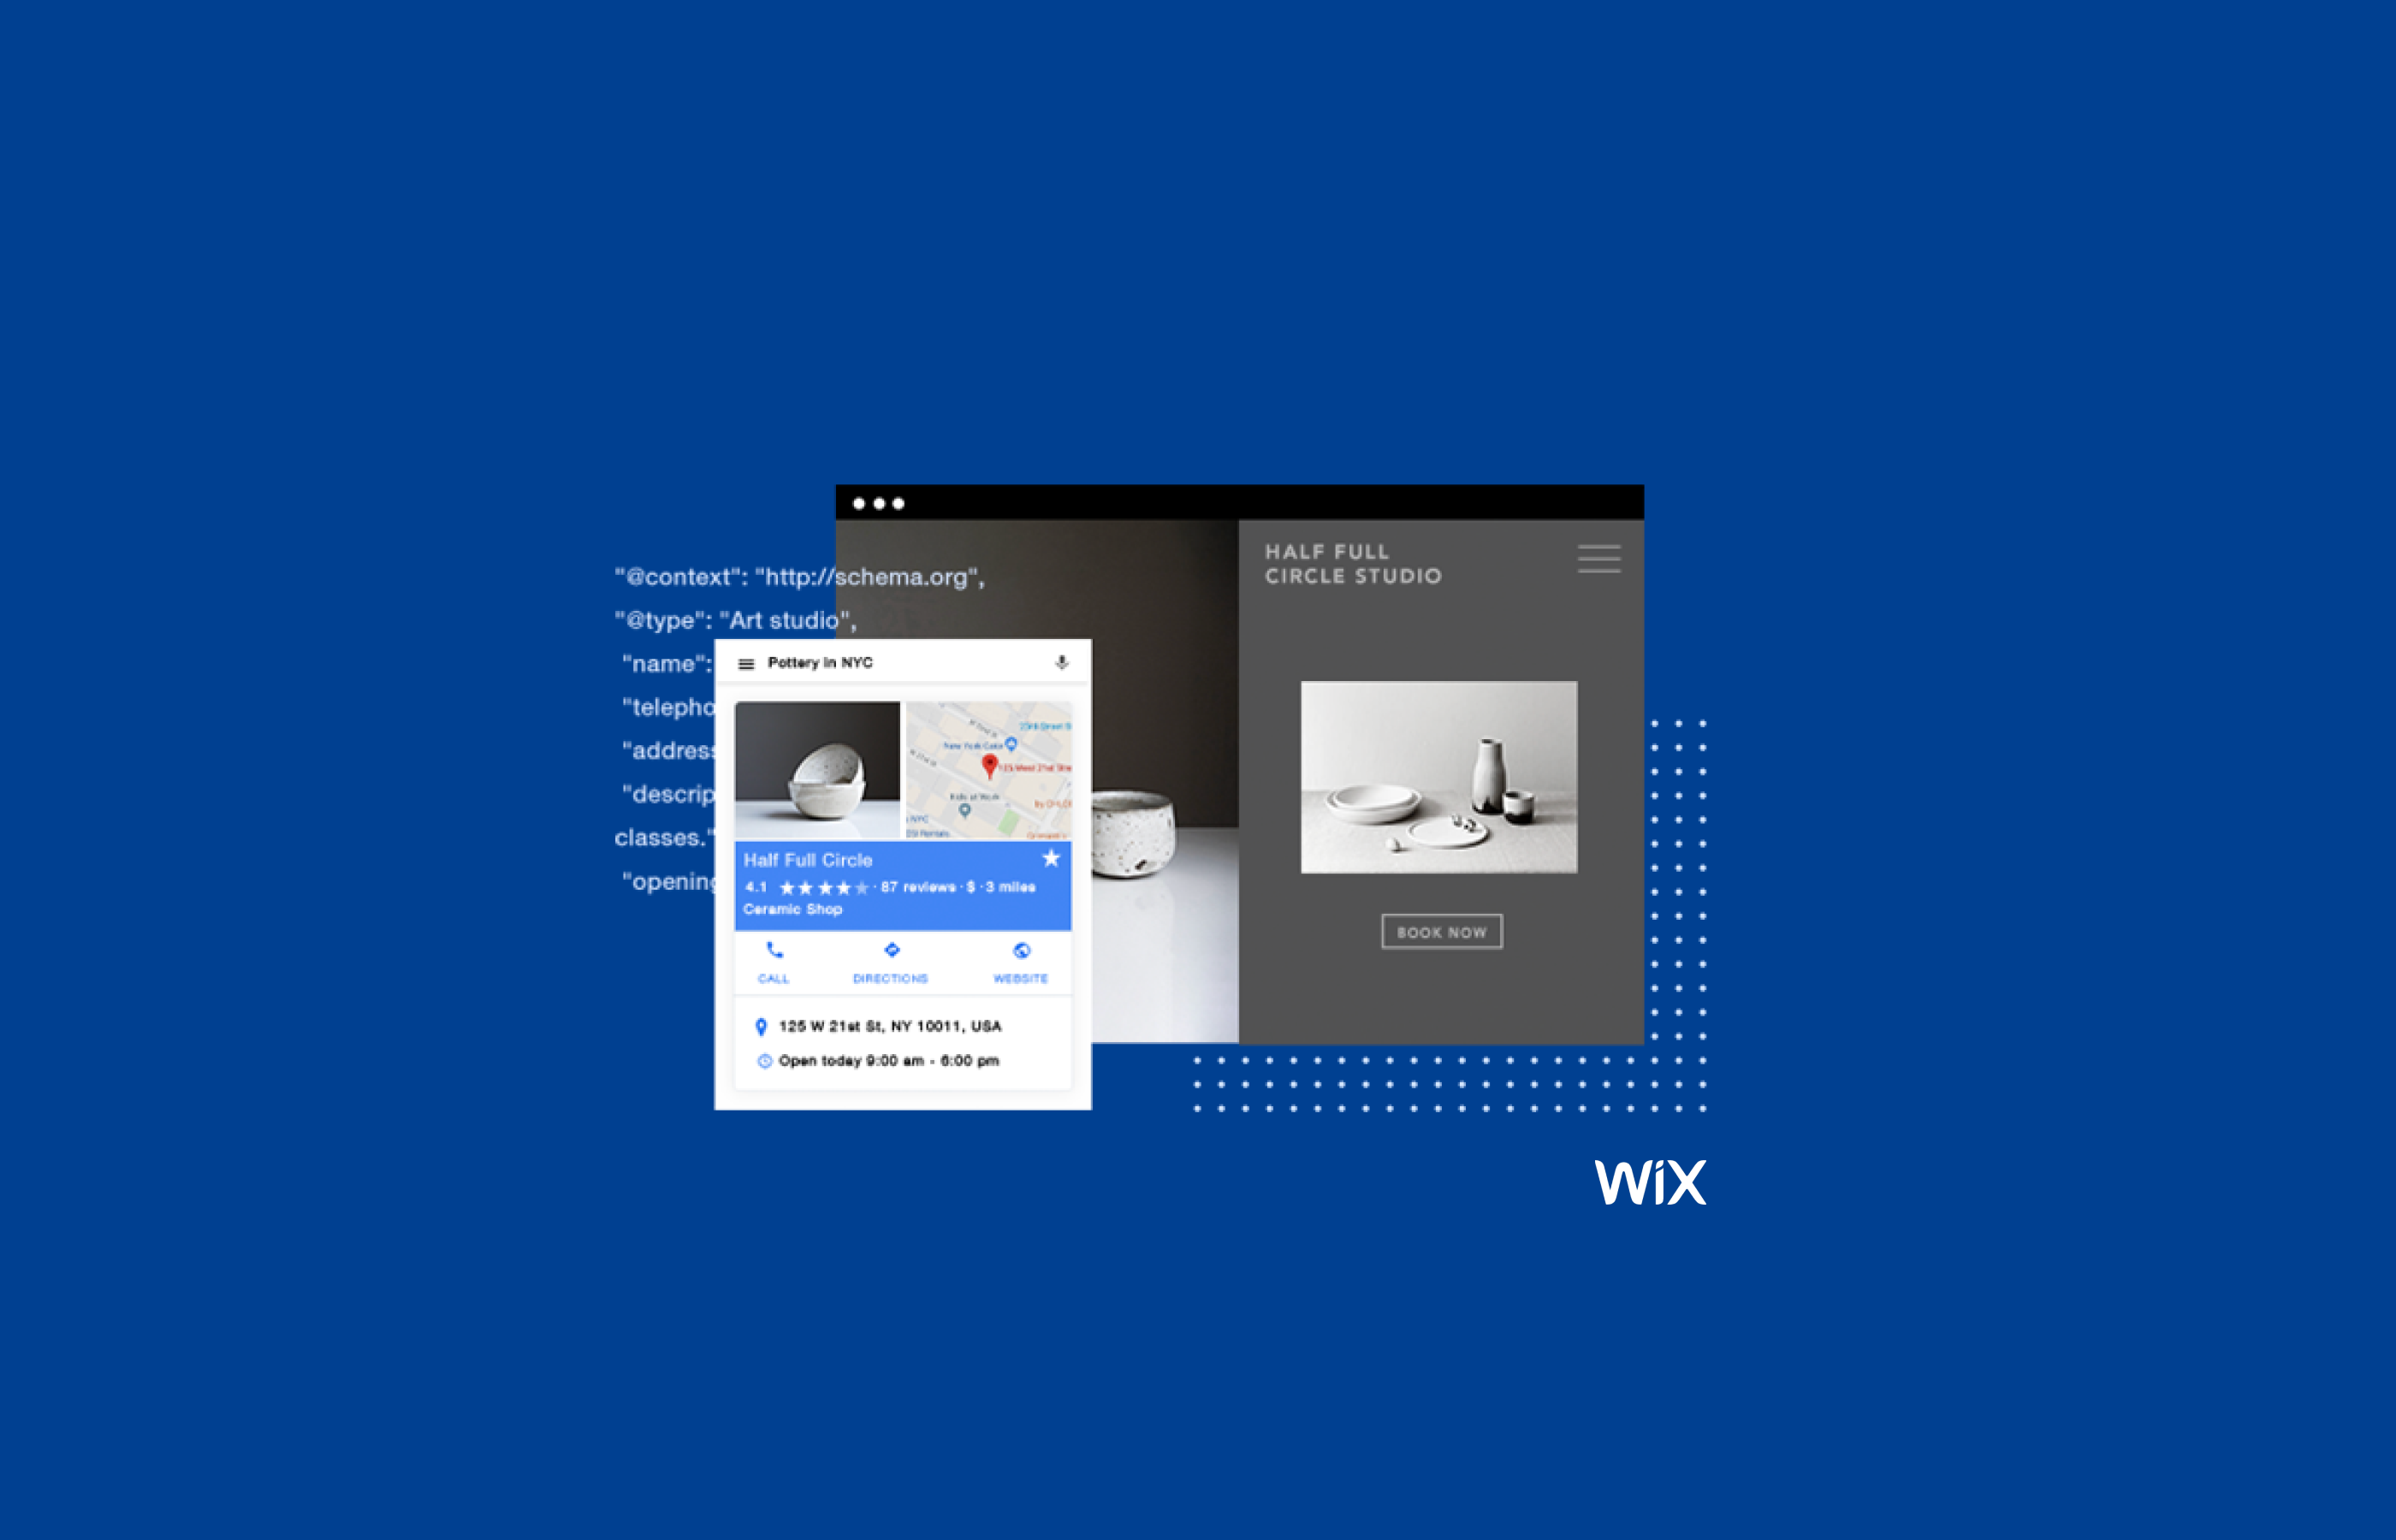 Get better SEO results for your site with WIX